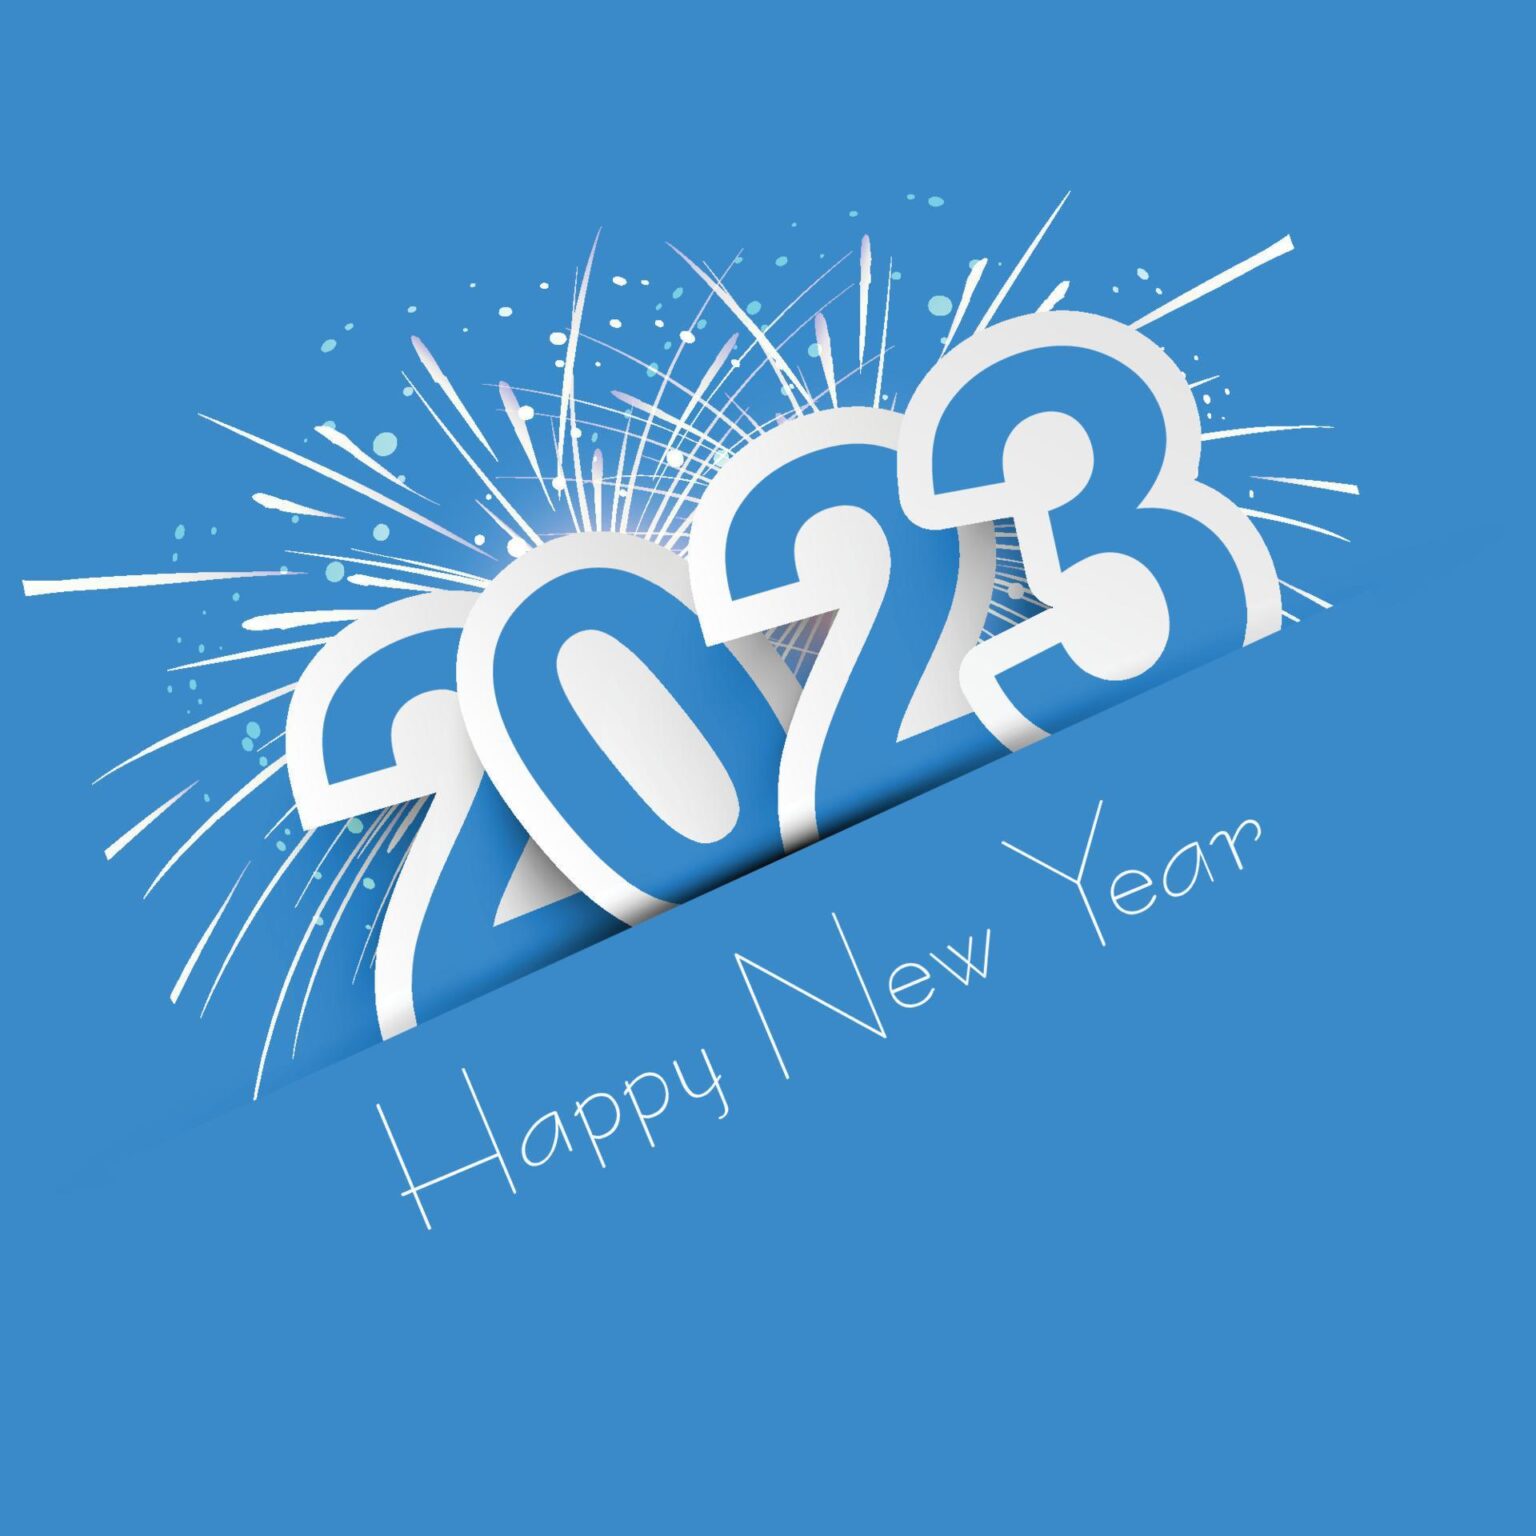 Beautiful New Year 2023 Card Celebration Holiday Design Free Vector